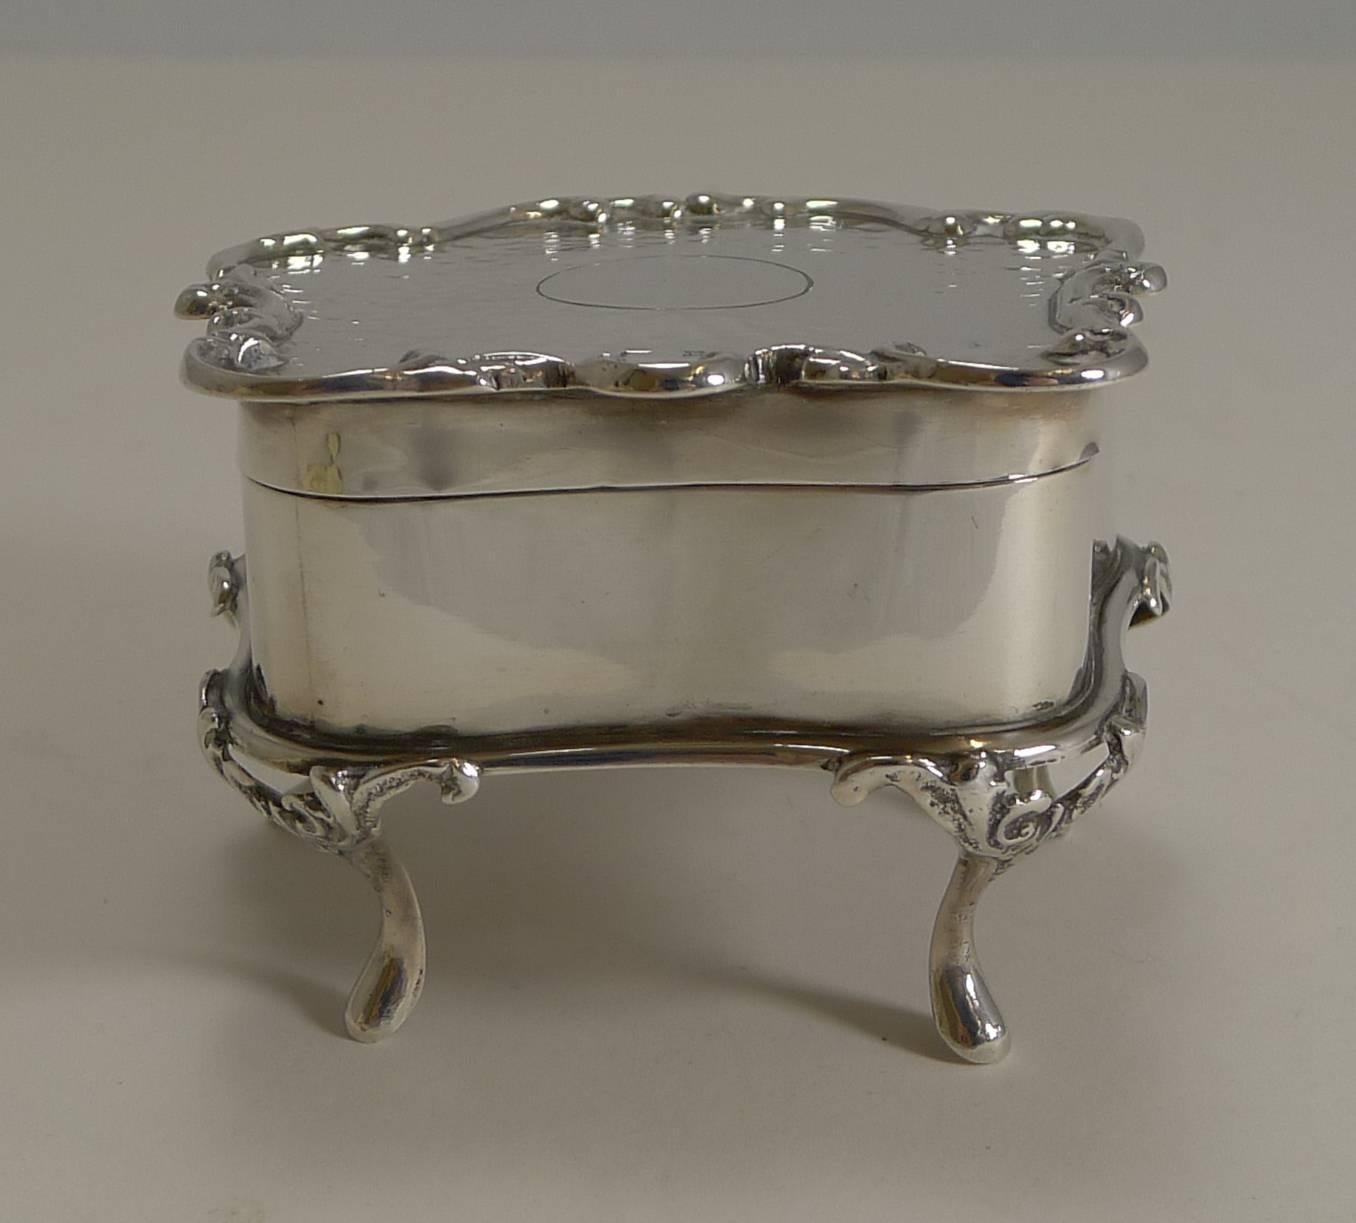 A handsome Edwardian jewelry or trinket co beautifully shaped and standing on four decorative cabriole legs. The lid is framed by a raised border with a hand planished decoration with a vacant circular cartouche to the centre.

The hinged lid fits